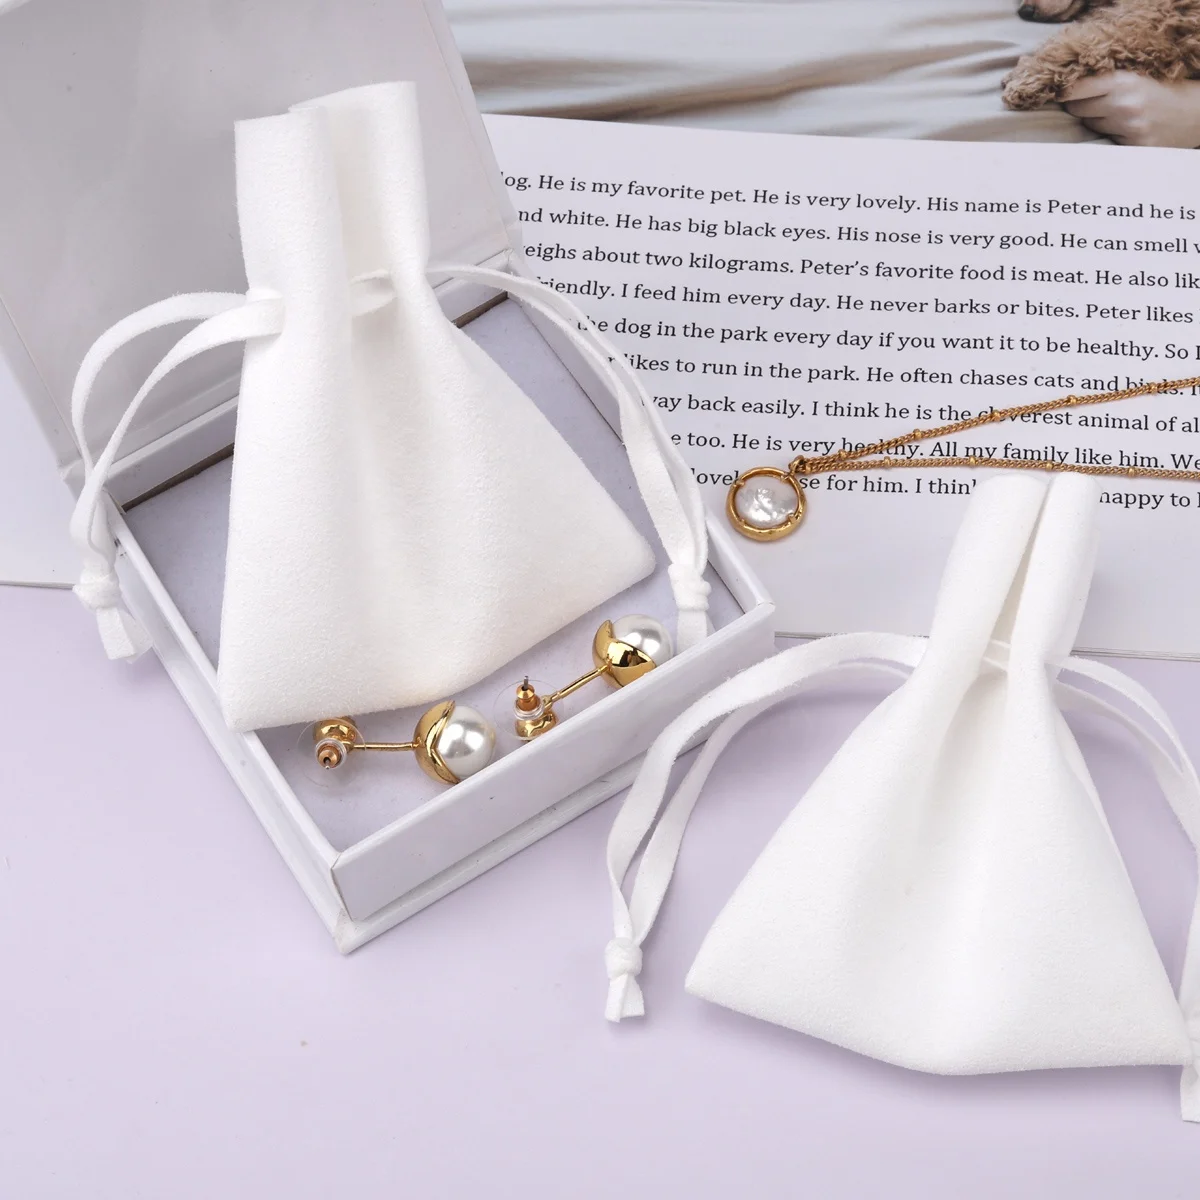 Hot sale Emboss Microfiber Jewelry Necklace Storage Envelope Bag White Luxury Microfiber Gift Jewelry Pouch